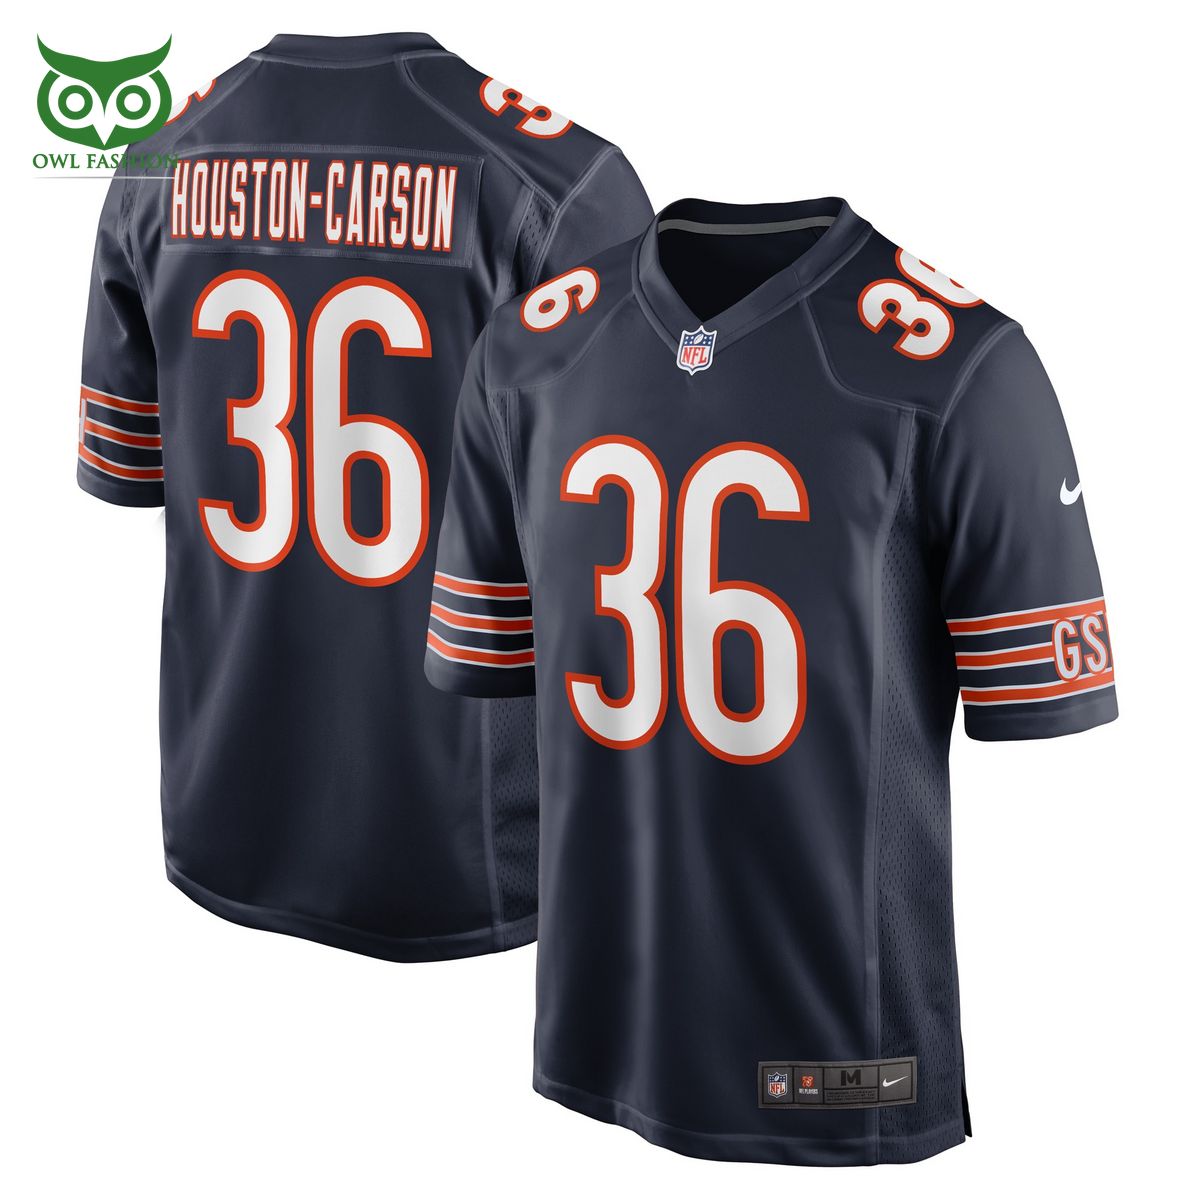 limited deandre houston carson chicago bears nike game player jersey navy shirt 1 kd2UQ